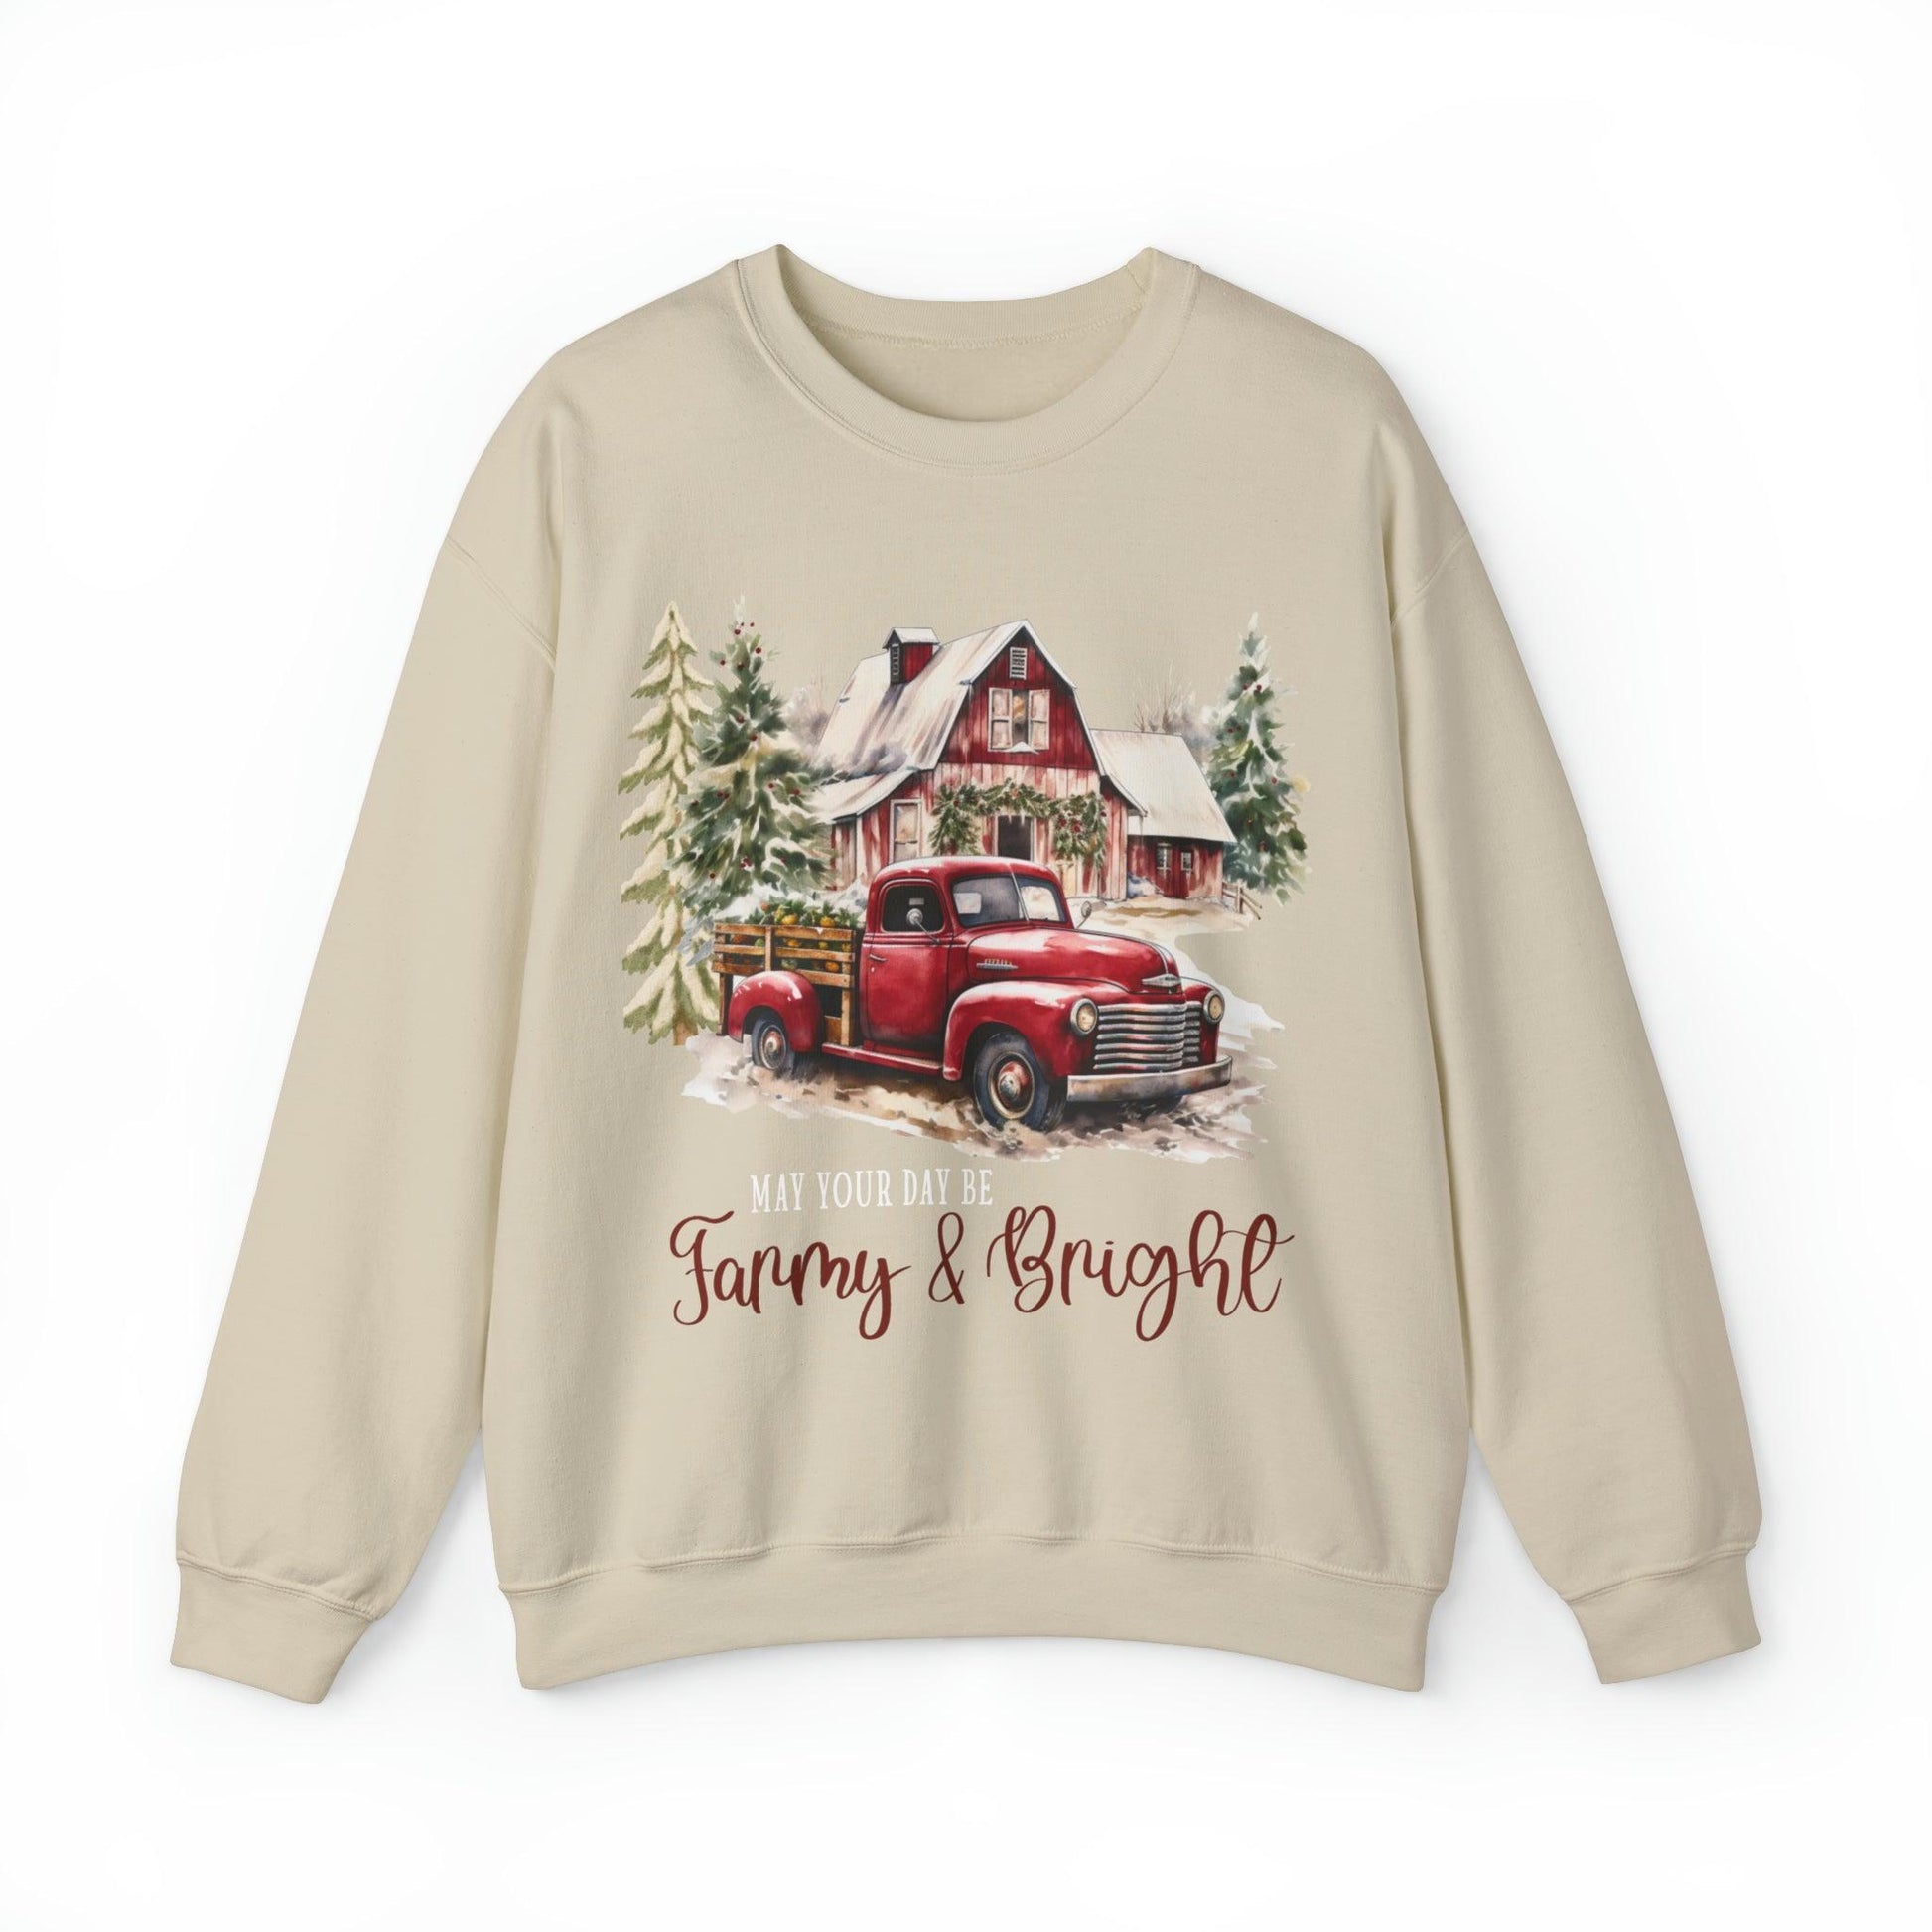 May Your Day Be Farmy And Bright Christmas Sweatshirt Christmas on The Farm Sweatshirt Christmas Farm Sweatshirt Christmas Sweater Trendy Christmas Shirt Farmers - Giftsmojo